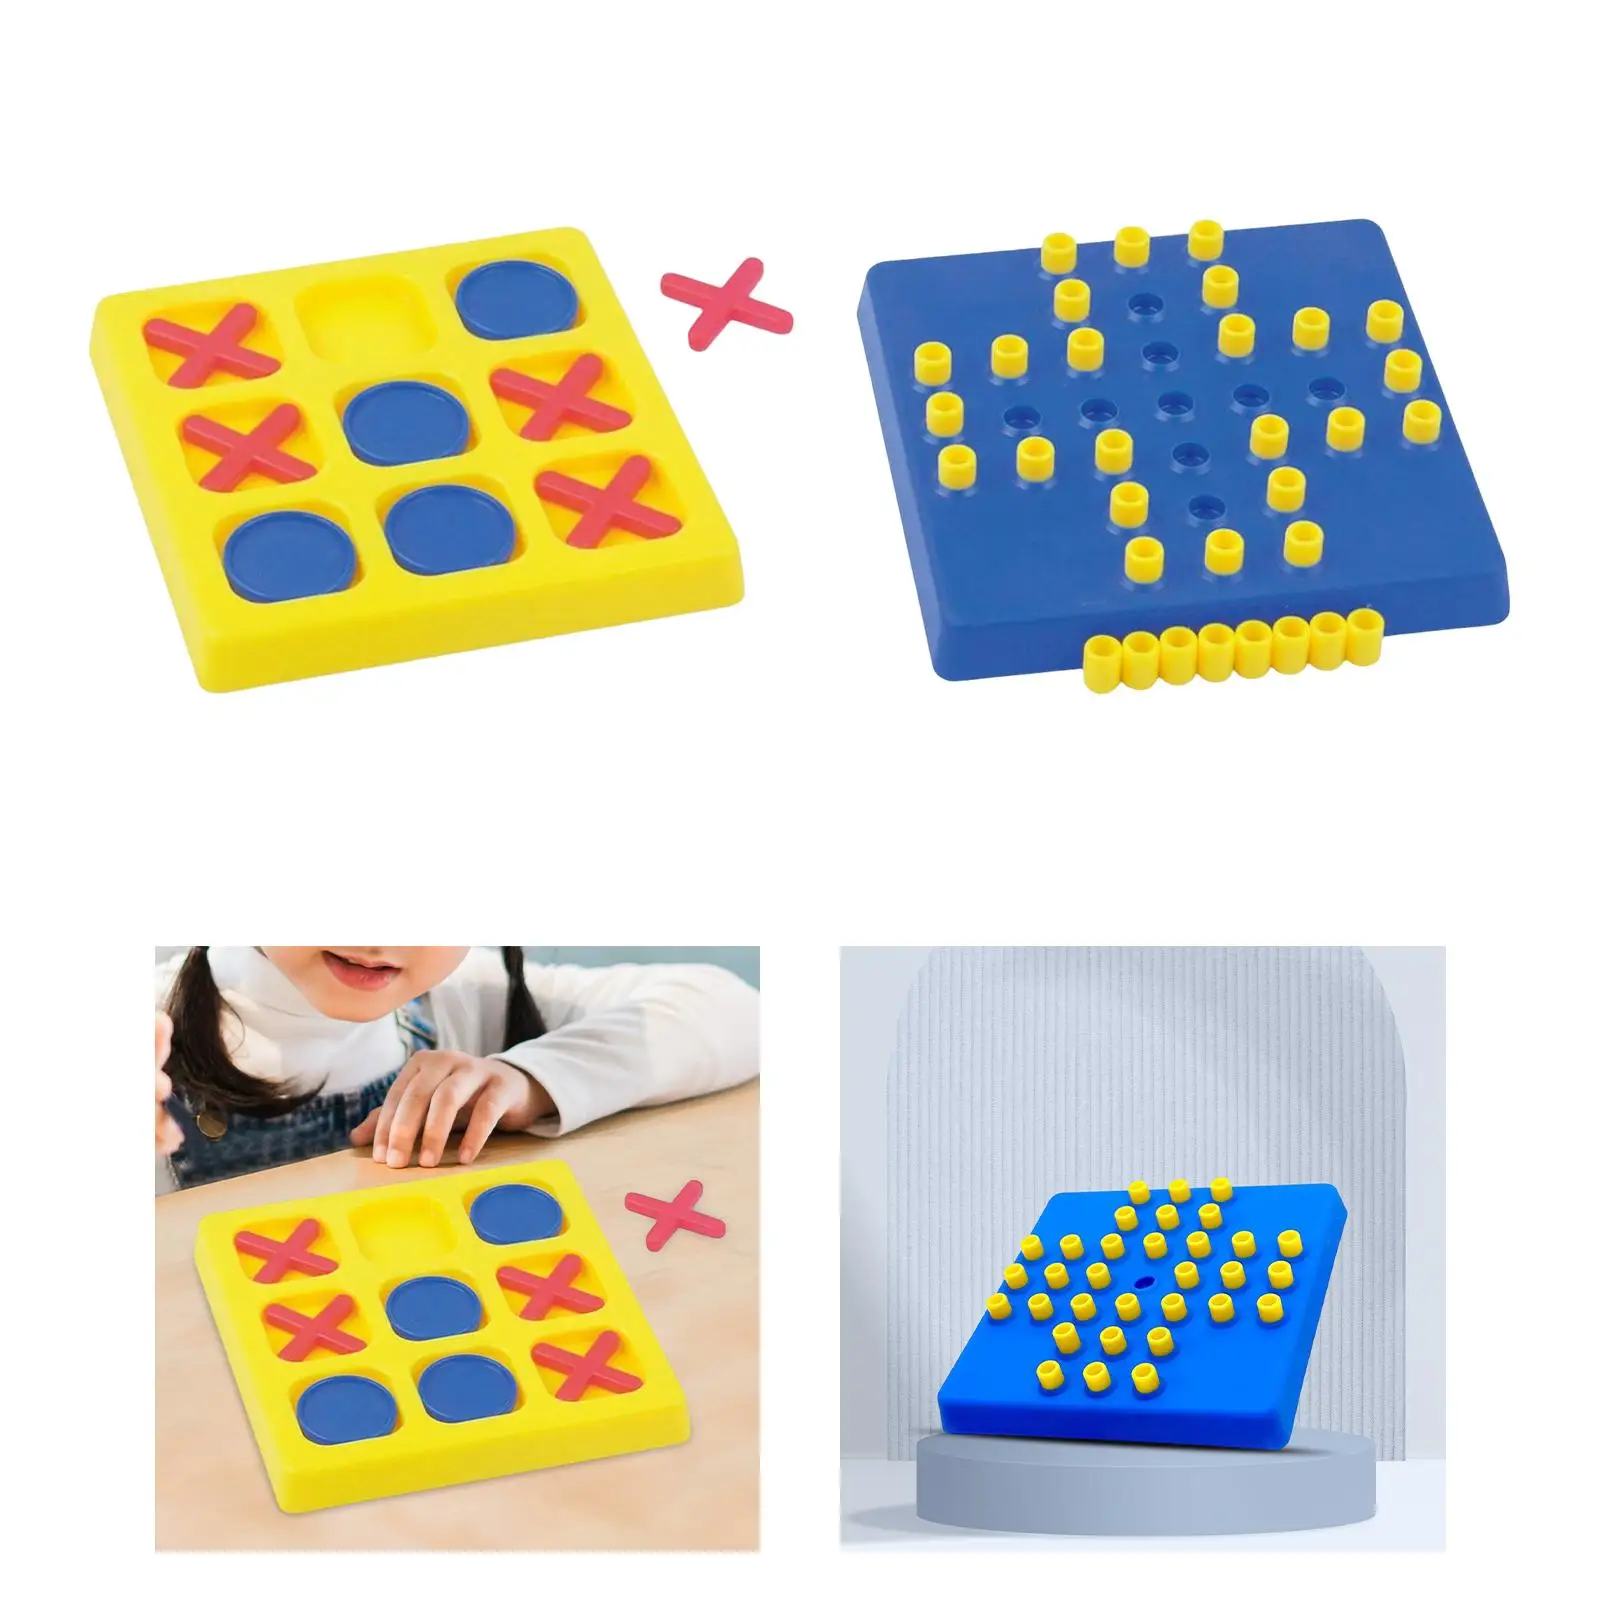 Tic TAC Toe Game Noughts and Crosses Double Battle Practical Brain Teaser Jump Marbles Marble Solitaire Board Game for Party